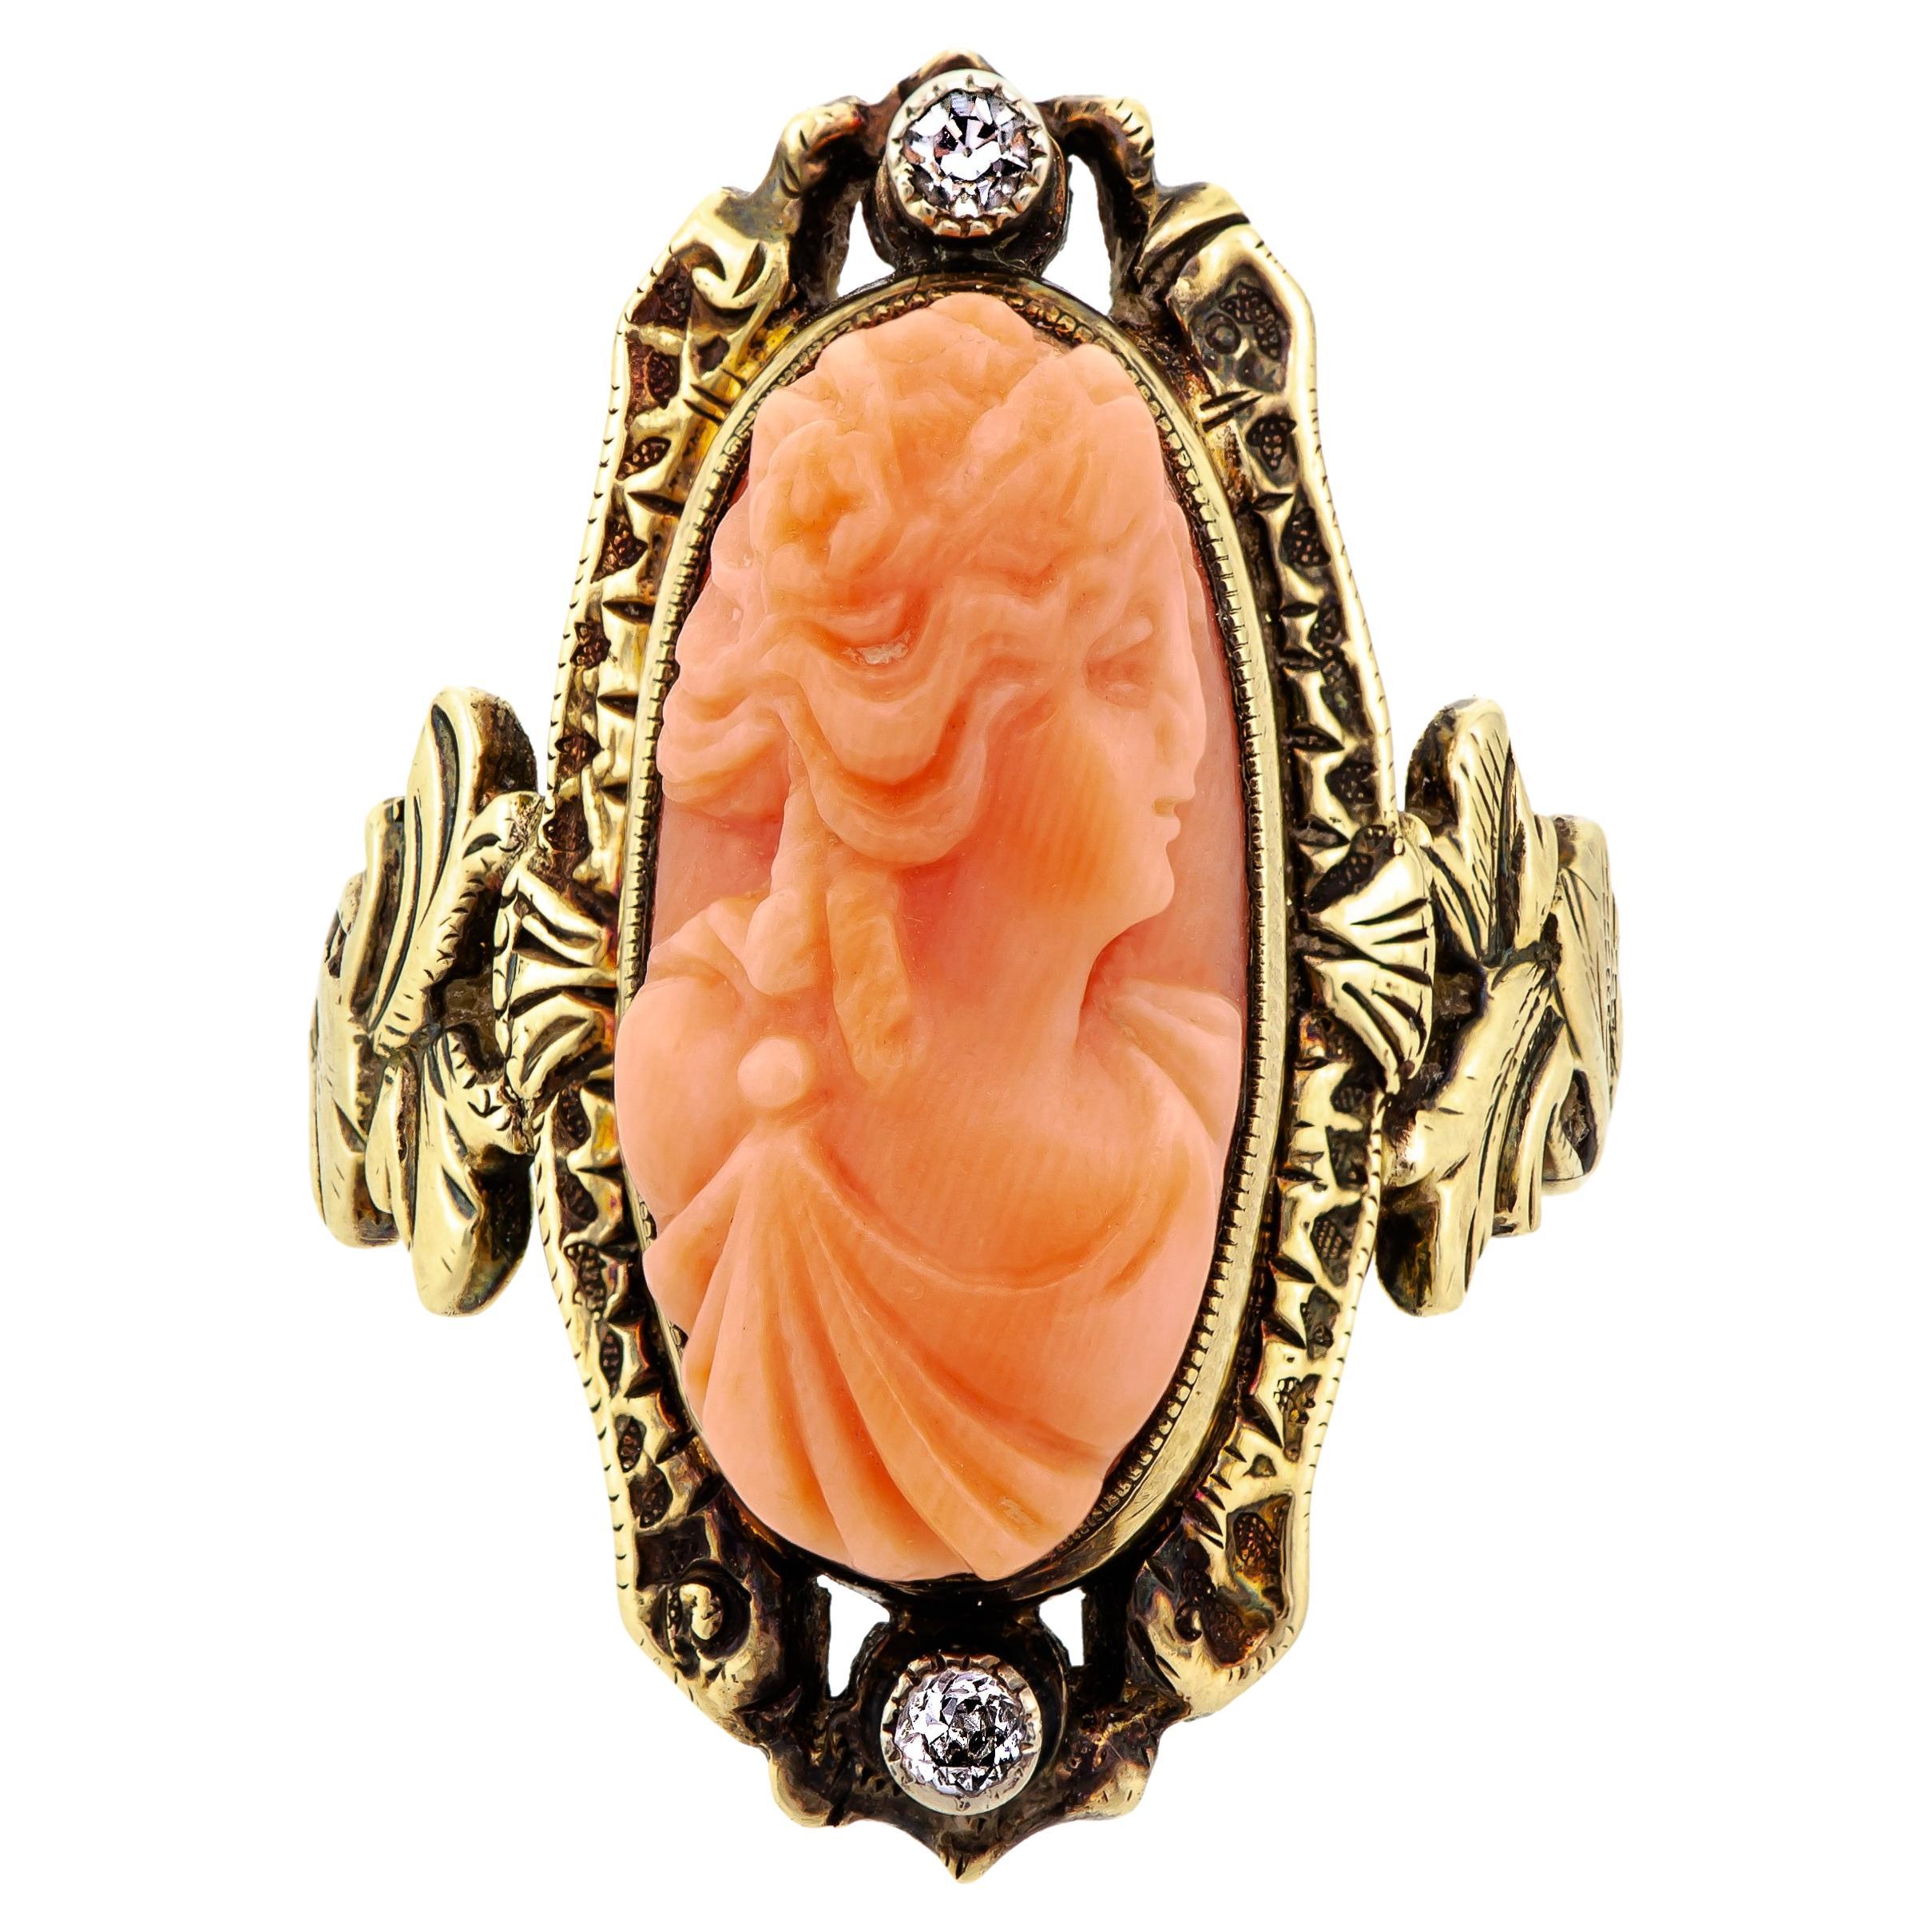 ec1151 ~400mm.size 8mm*6mm.one.* Details about   Beauty Hand CARVING CAMEO ~ black coral 